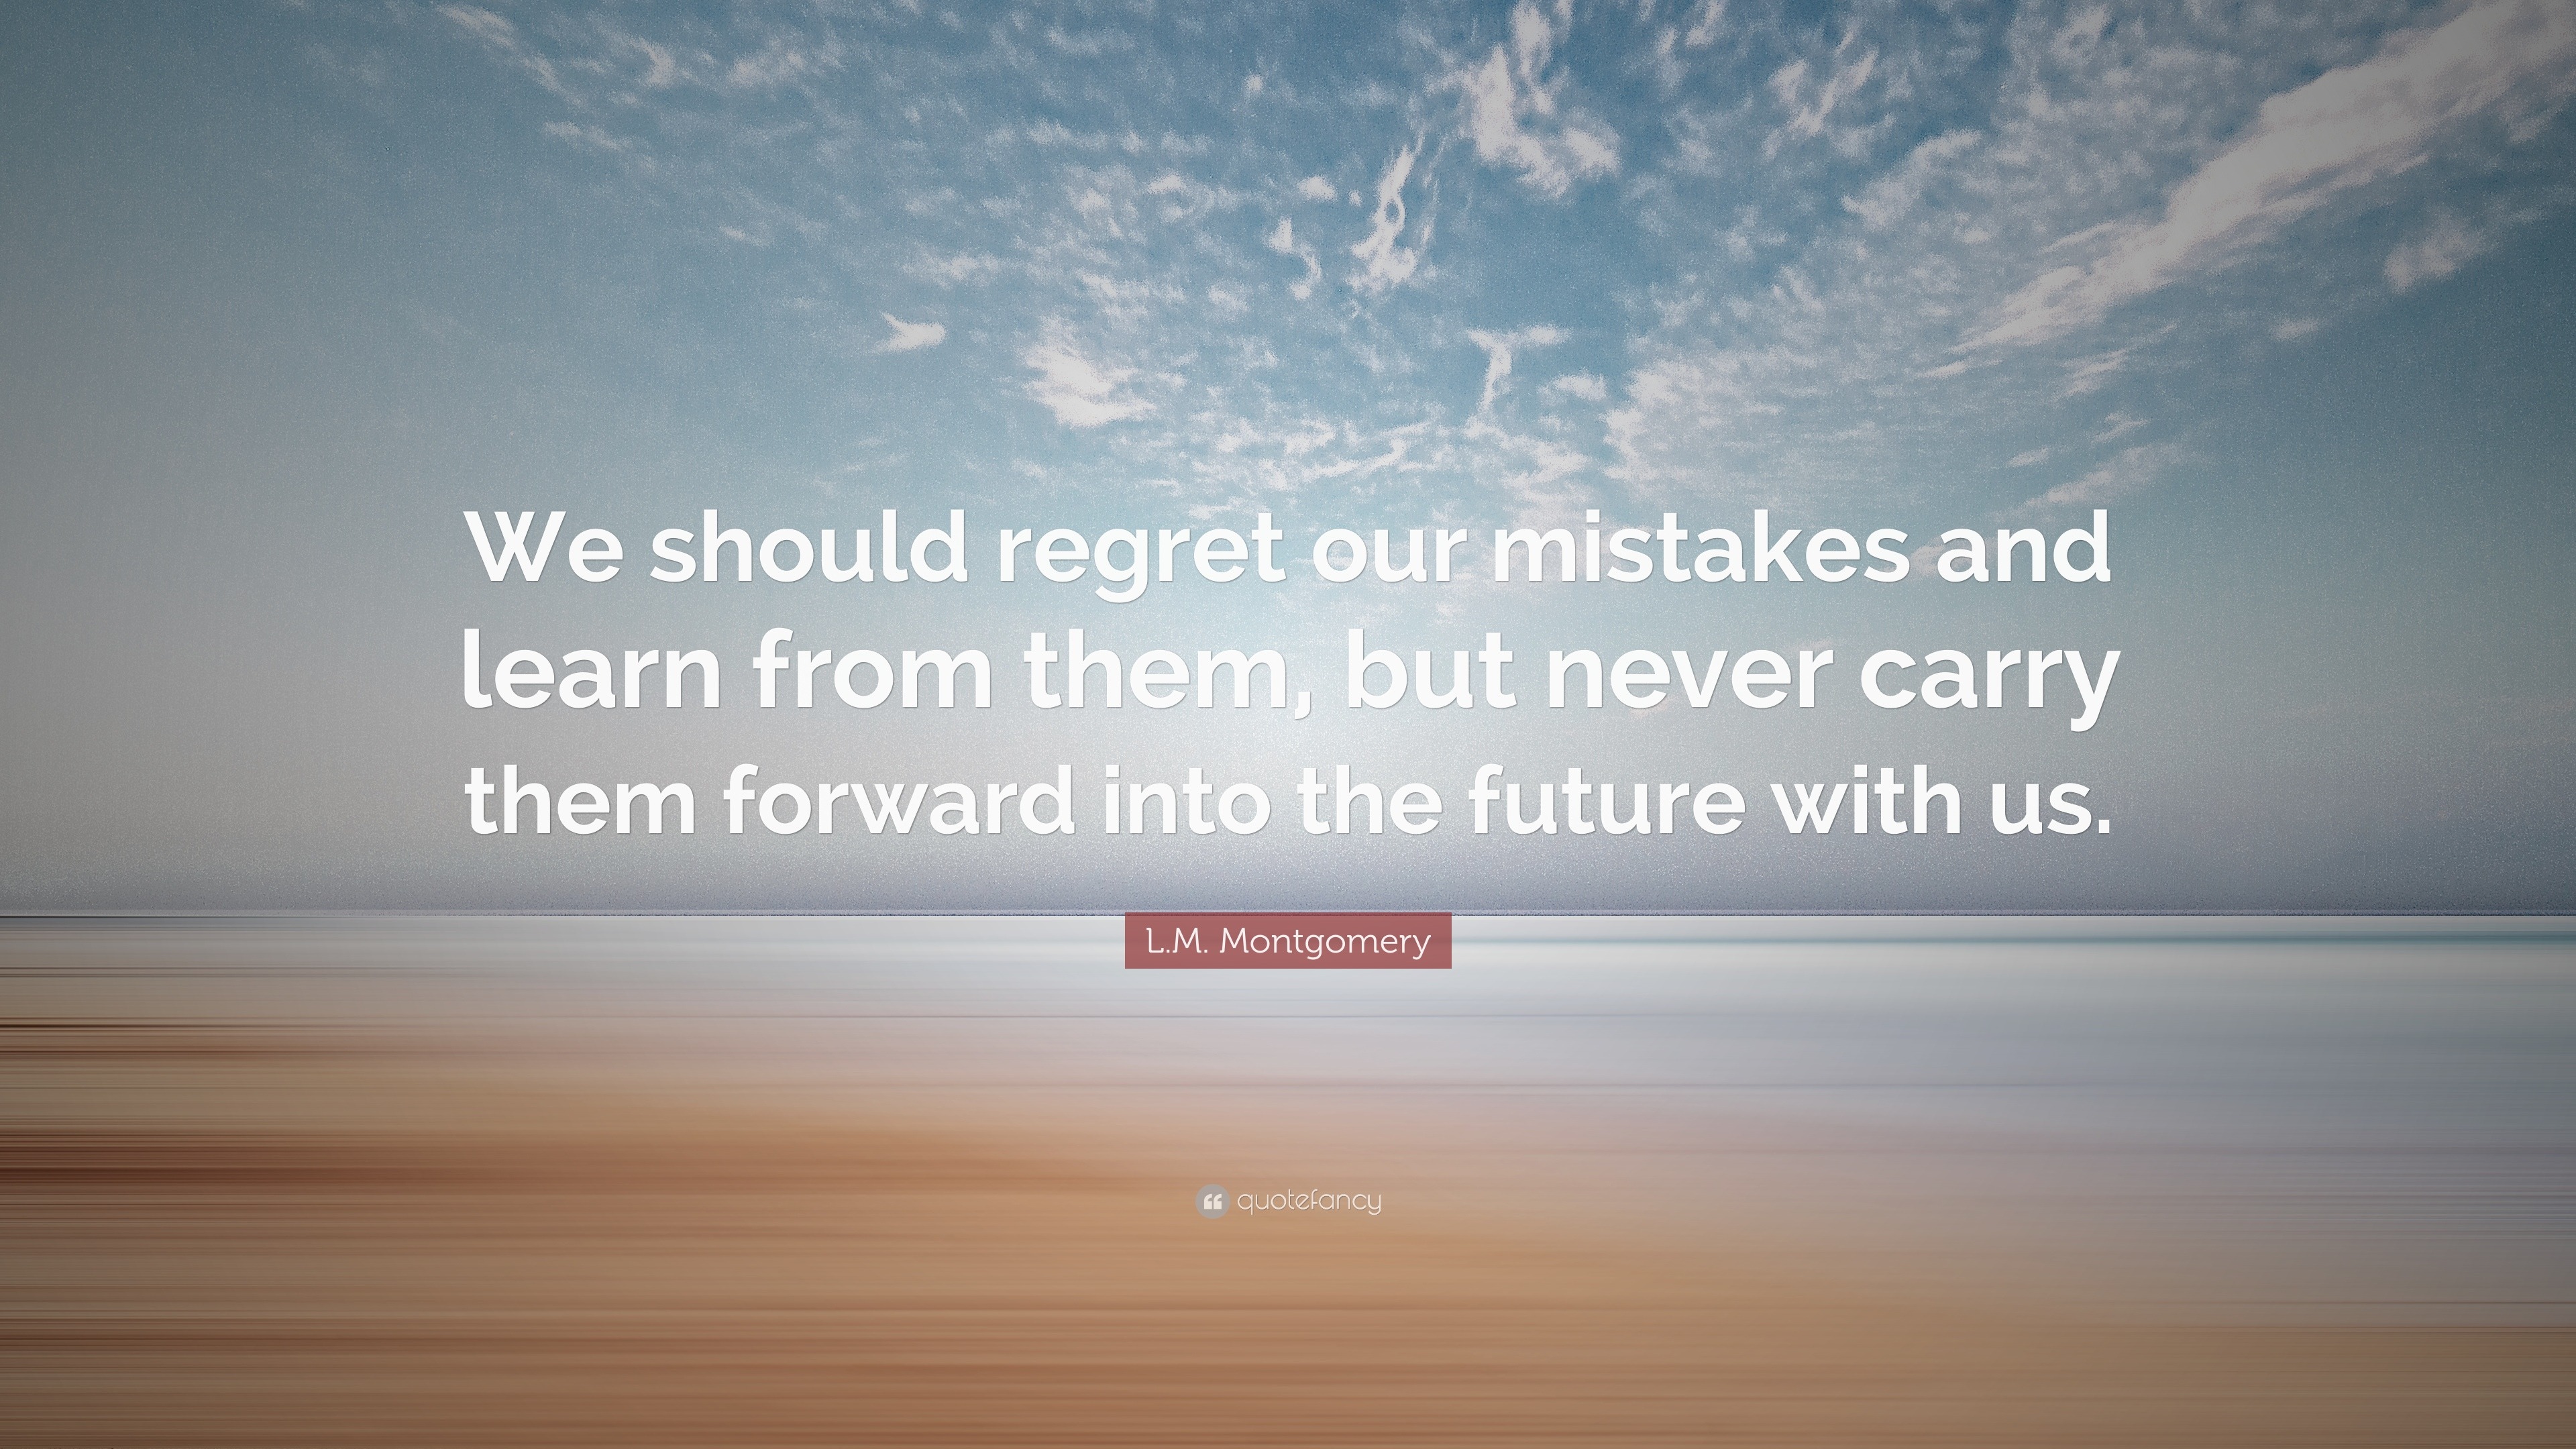 REGRET AND MISTAKE QUOTES TUMBLR  Mistake quotes, Regret quotes